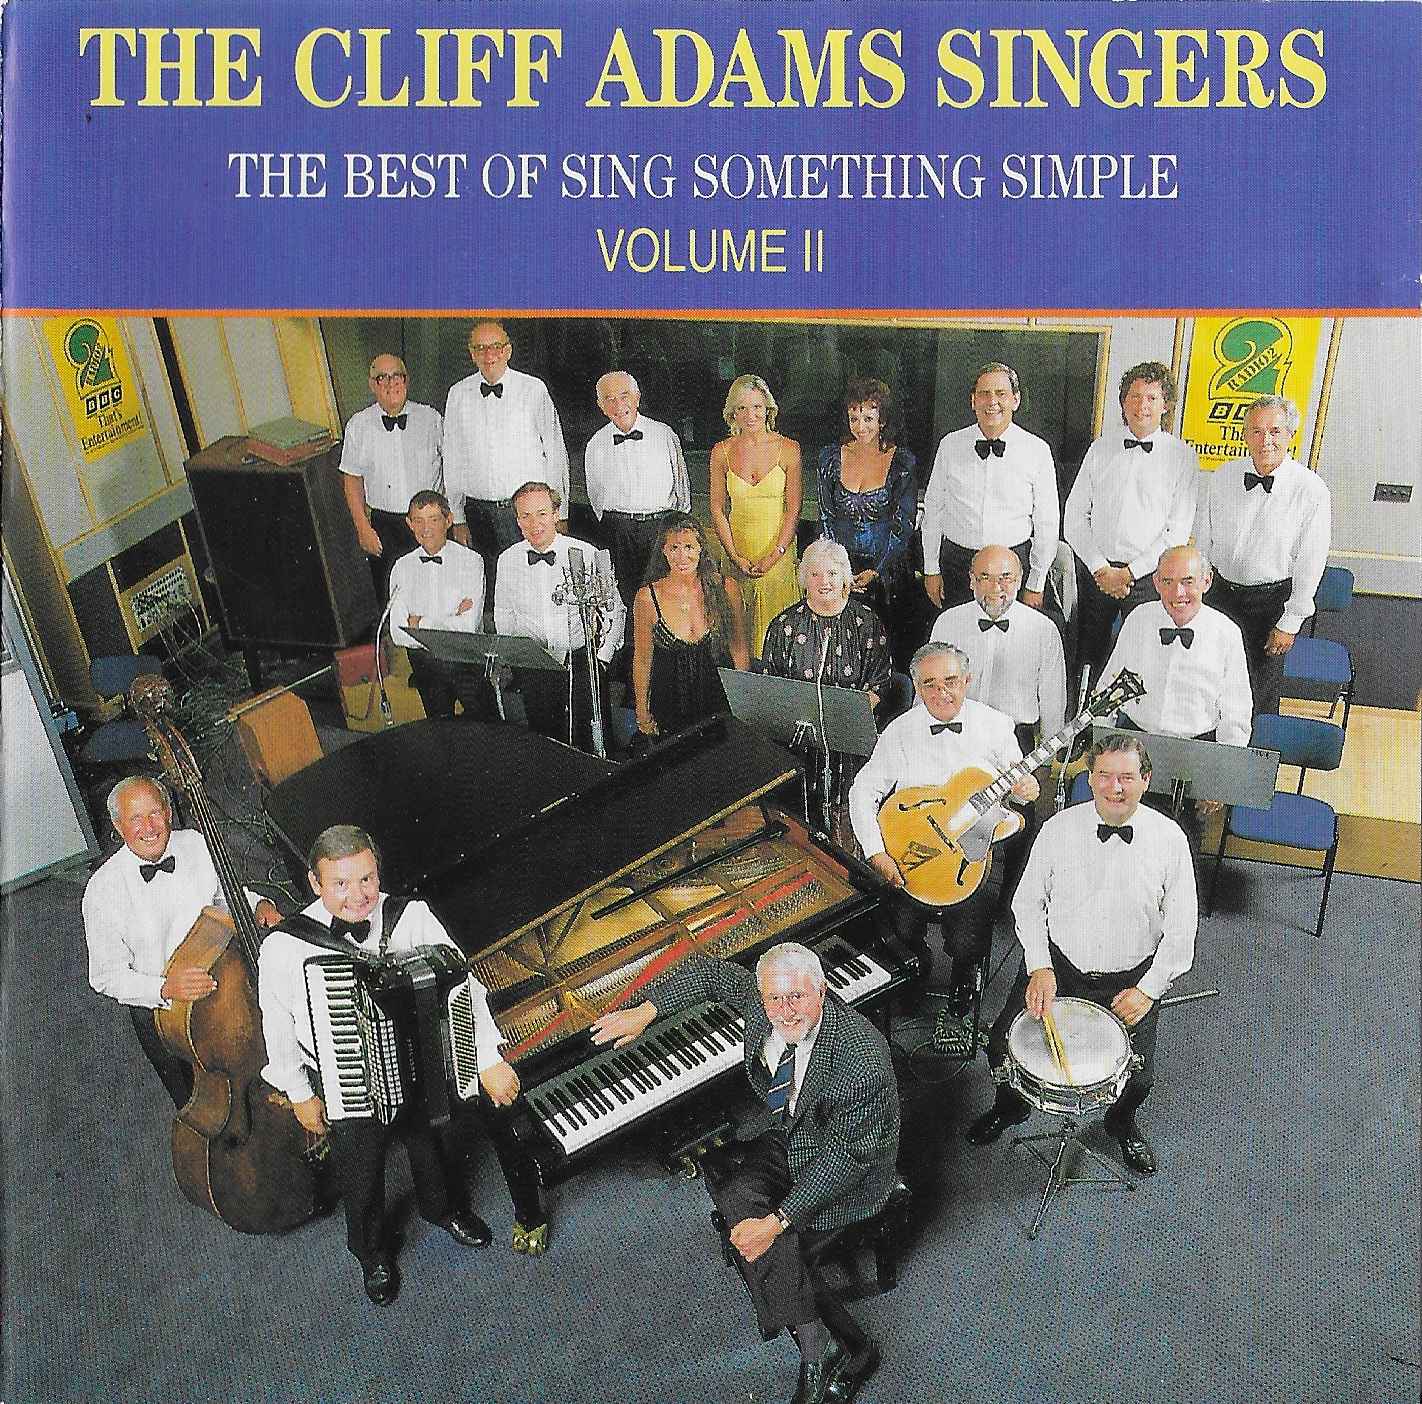 Picture of PWKM 660 Cliff Adams - Volume 2 by artist Various / Cliff Adams from the BBC cds - Records and Tapes library